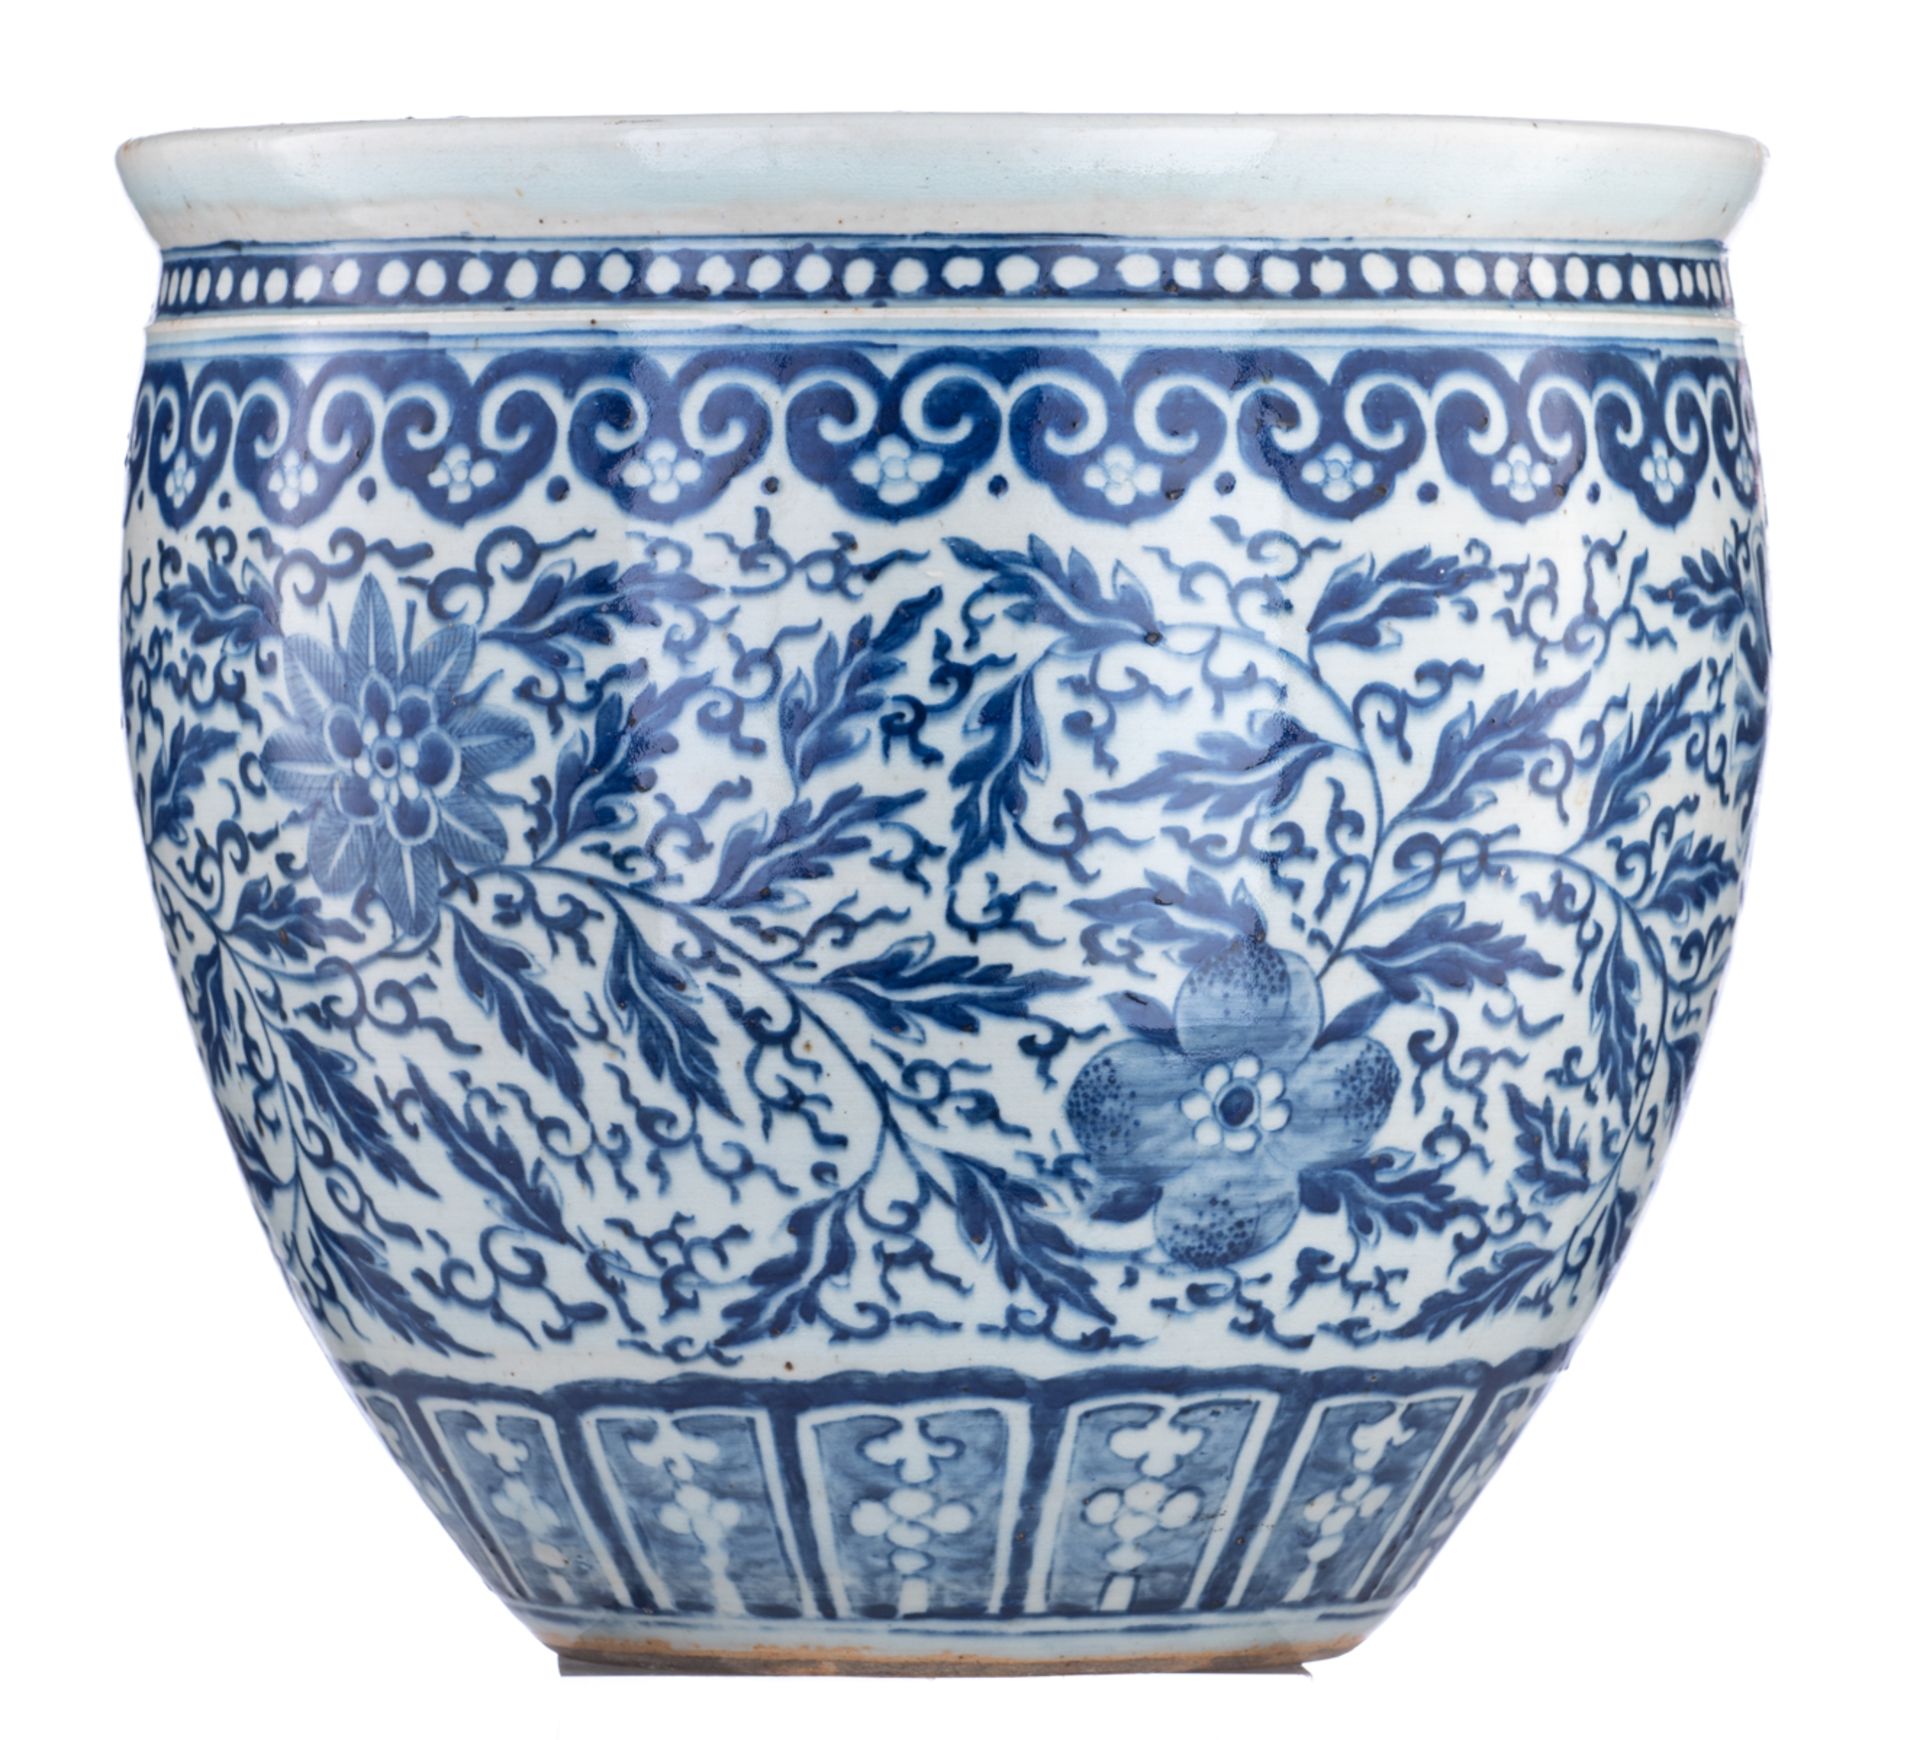 A Chinese blue and white cachepot, decorated with flower scrolls and leafy tendrils, 19thC, H 33 - ø - Image 5 of 7